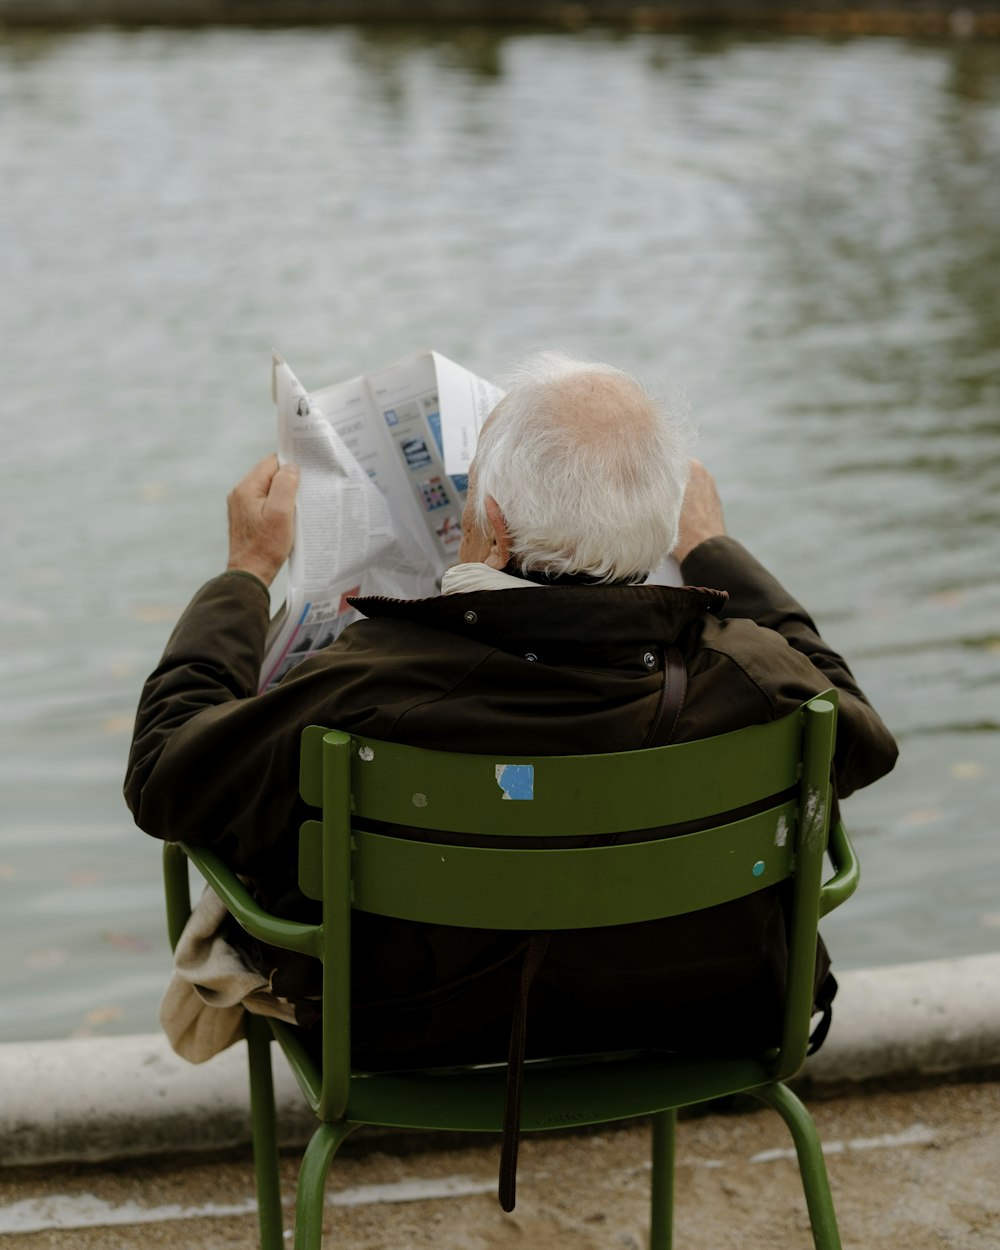 a person reading a newspaper on a bench by the water